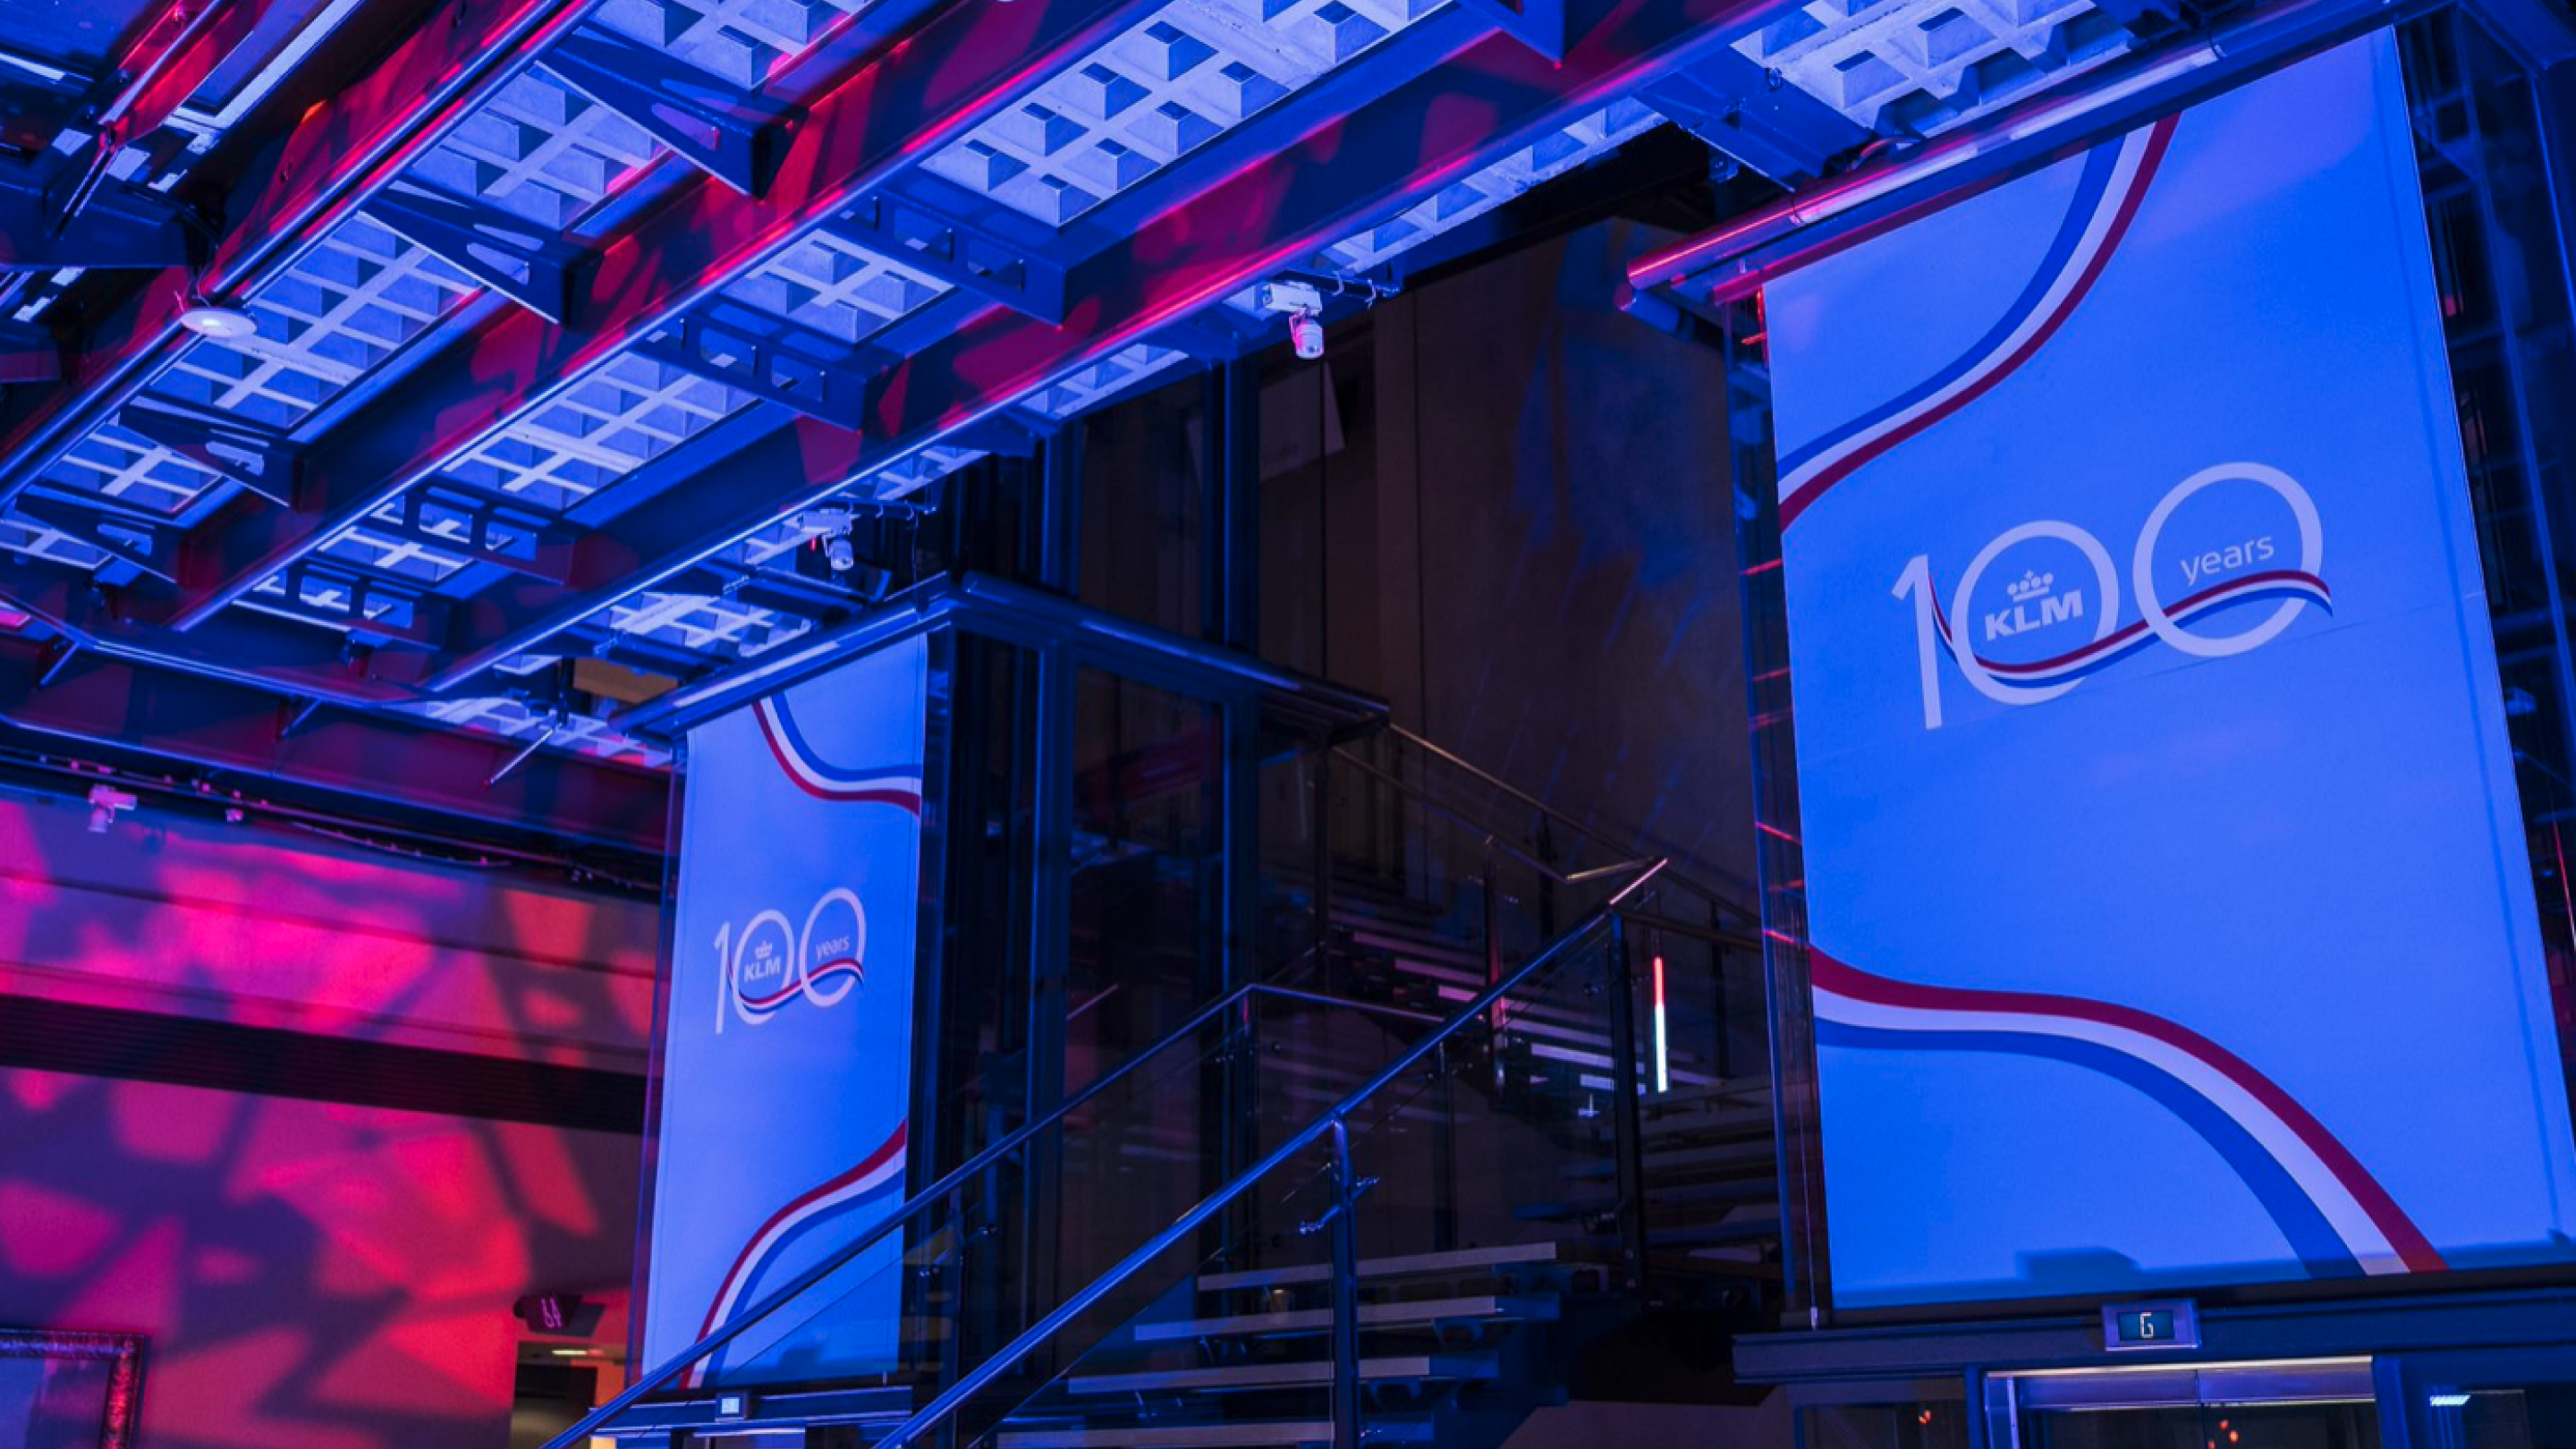 Staircase with floor to ceiling blue banners with a 100 logo on